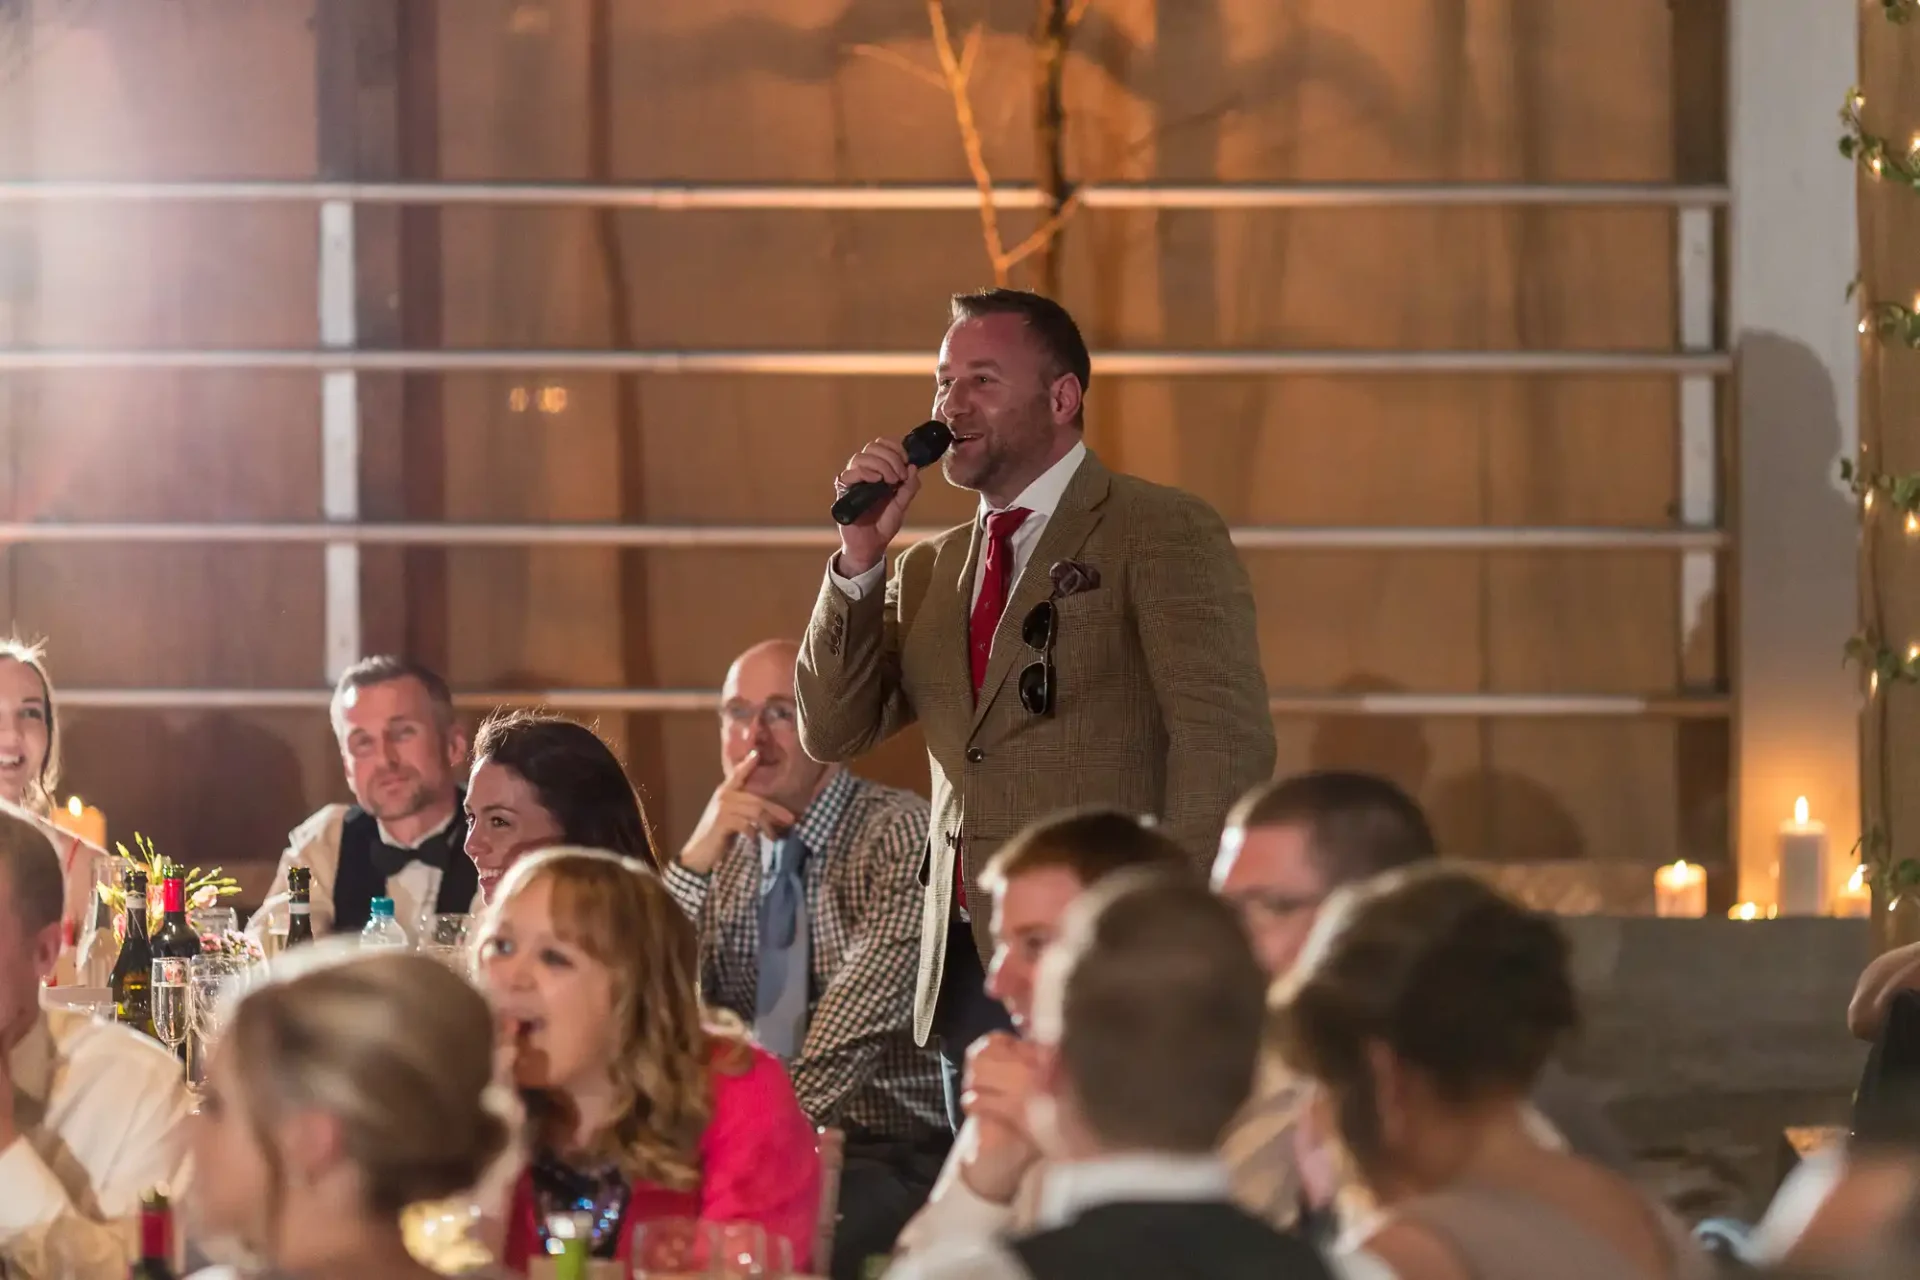 A man in a tweed jacket and red boutonniere speaks into a microphone at a festive event, with people seated at tables in soft-lit background.